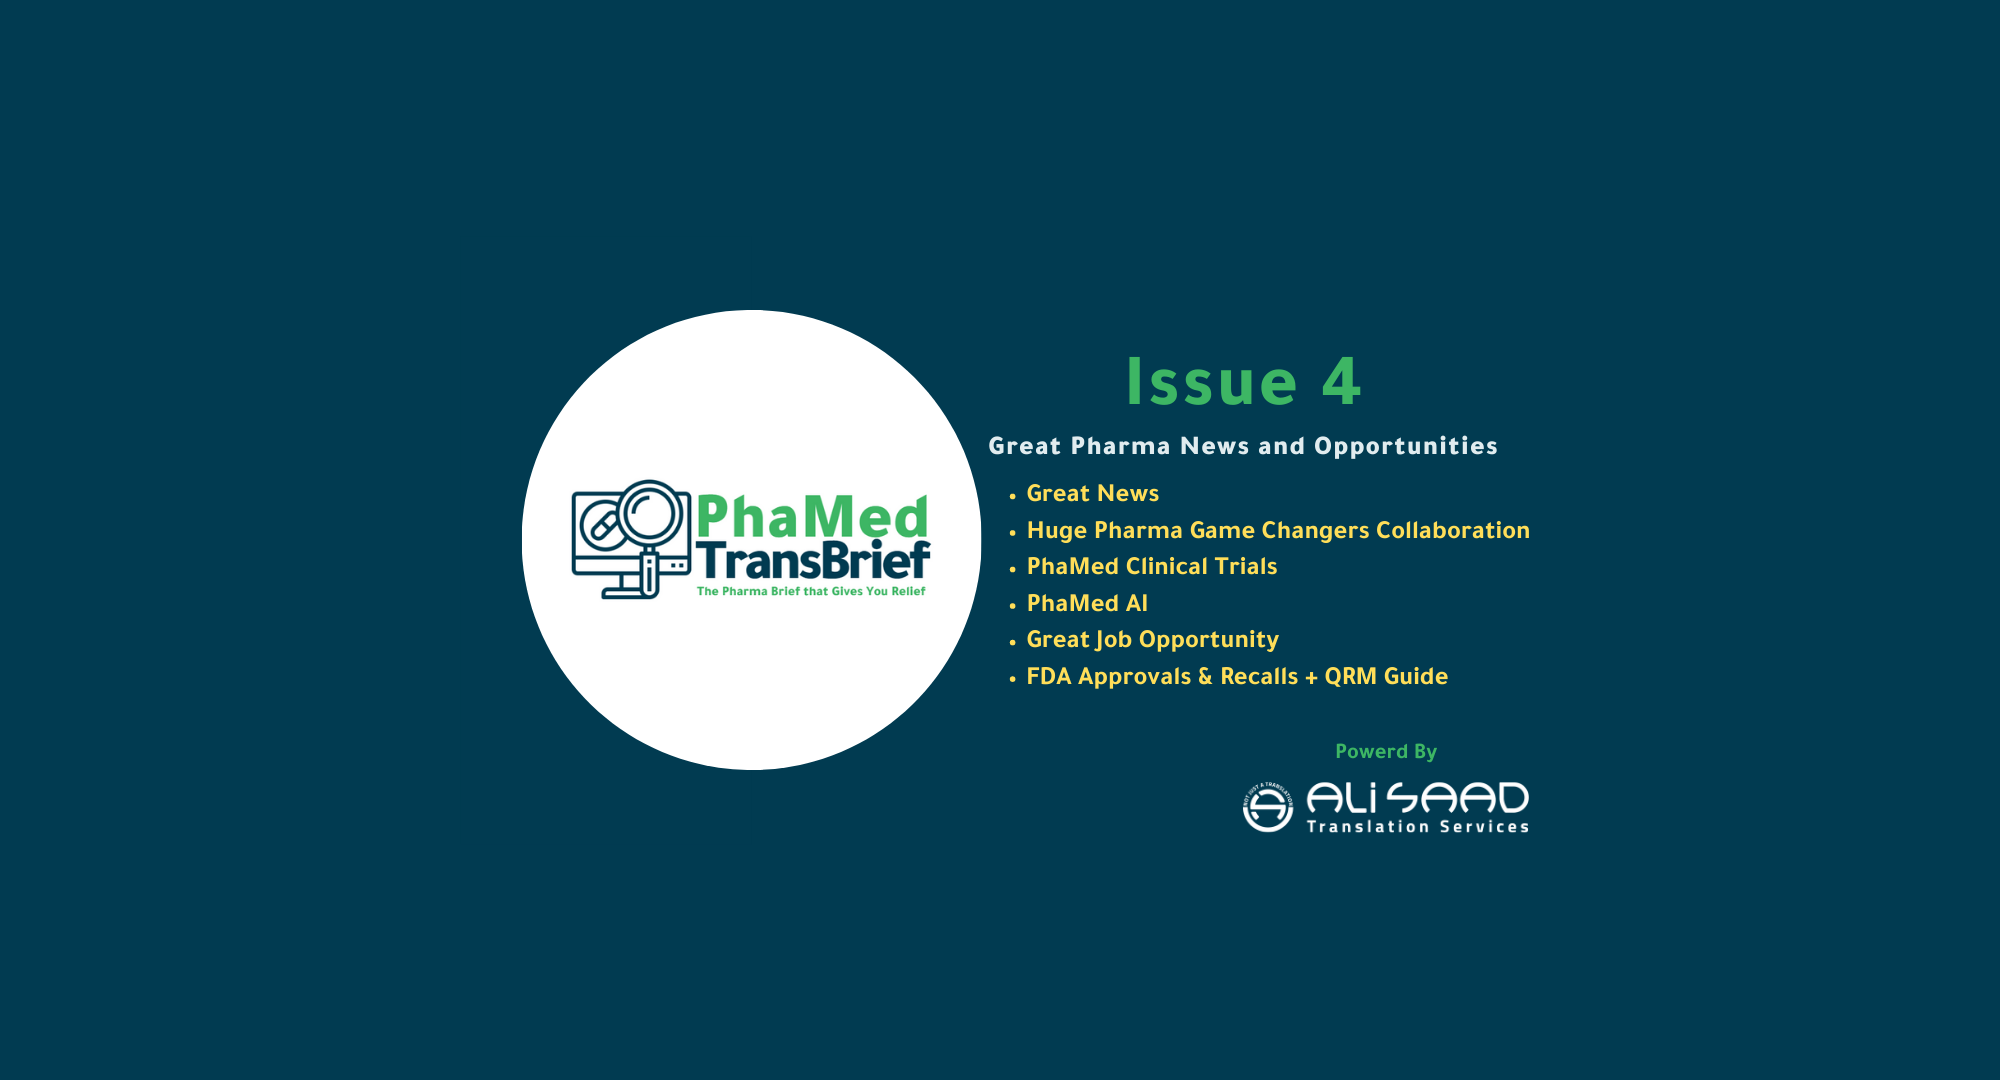 The feature image of the PhaMed Newsletter issue 4 by Ali Saad Arabic Translation Services